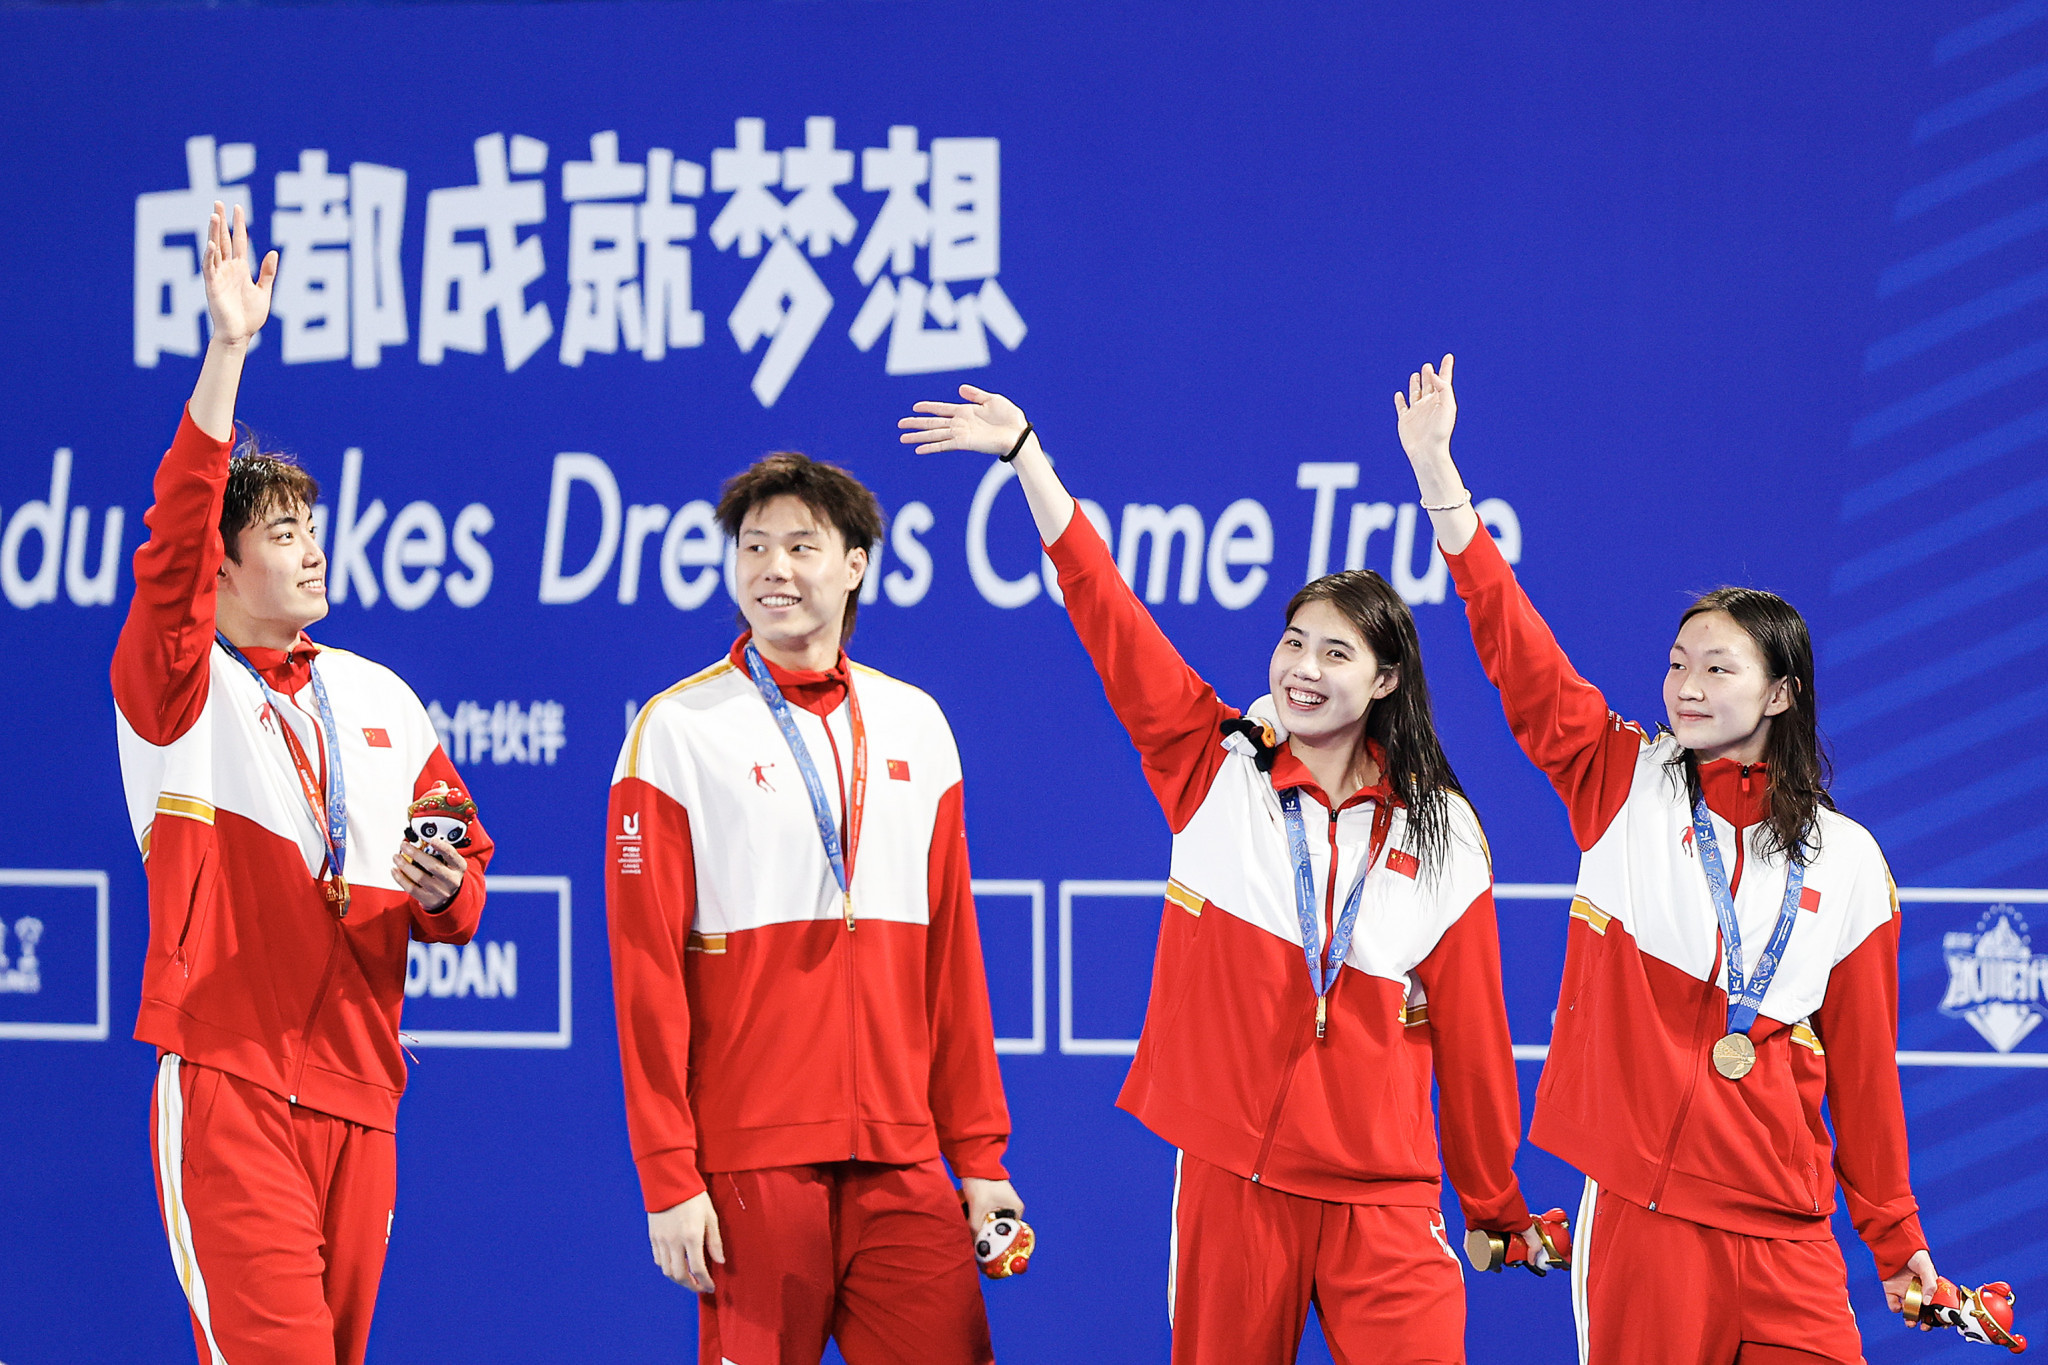 Mixed 4x100 medley relay among Chinese swimming successes on day five of Chengdu 2021